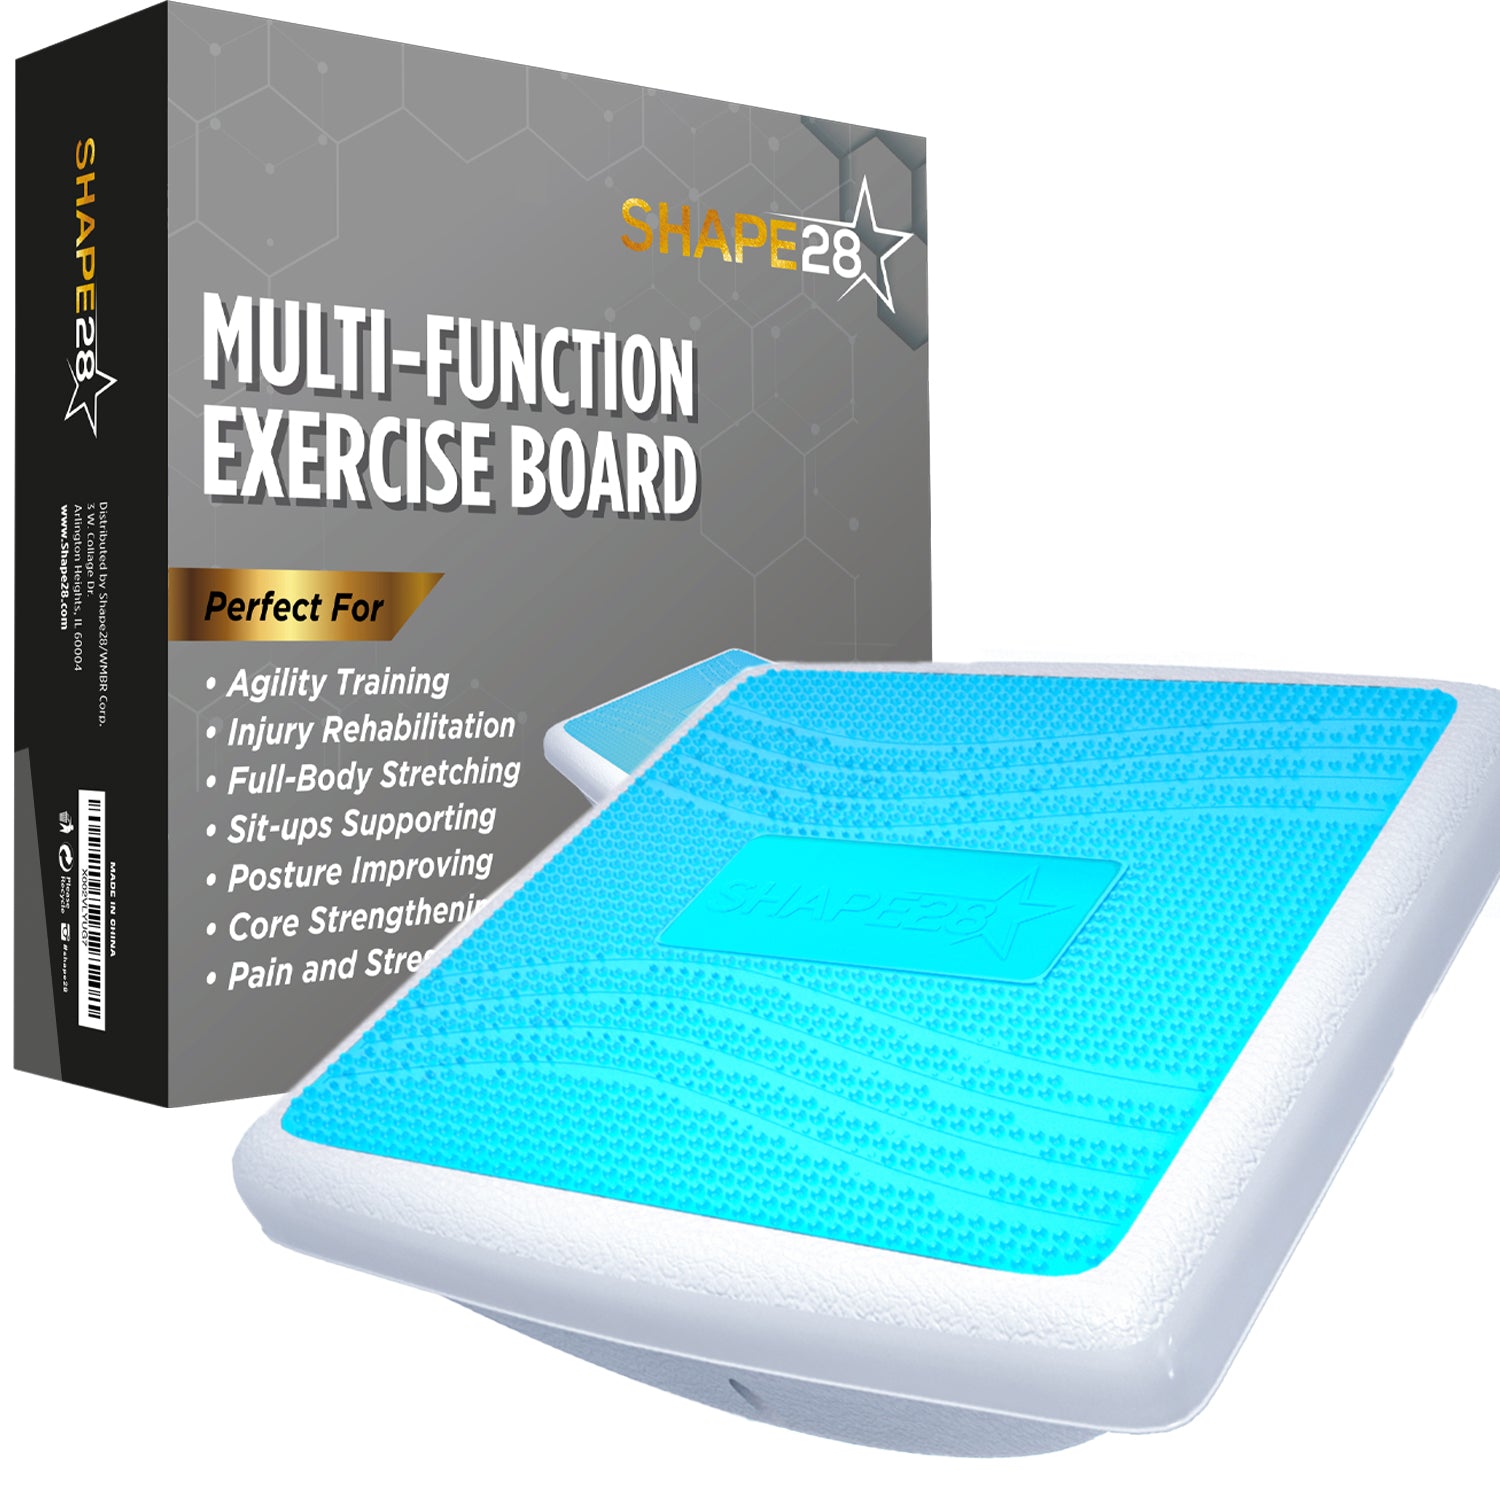 Balance Board Exercise Equipment - Balance Equipment Physical Therapy